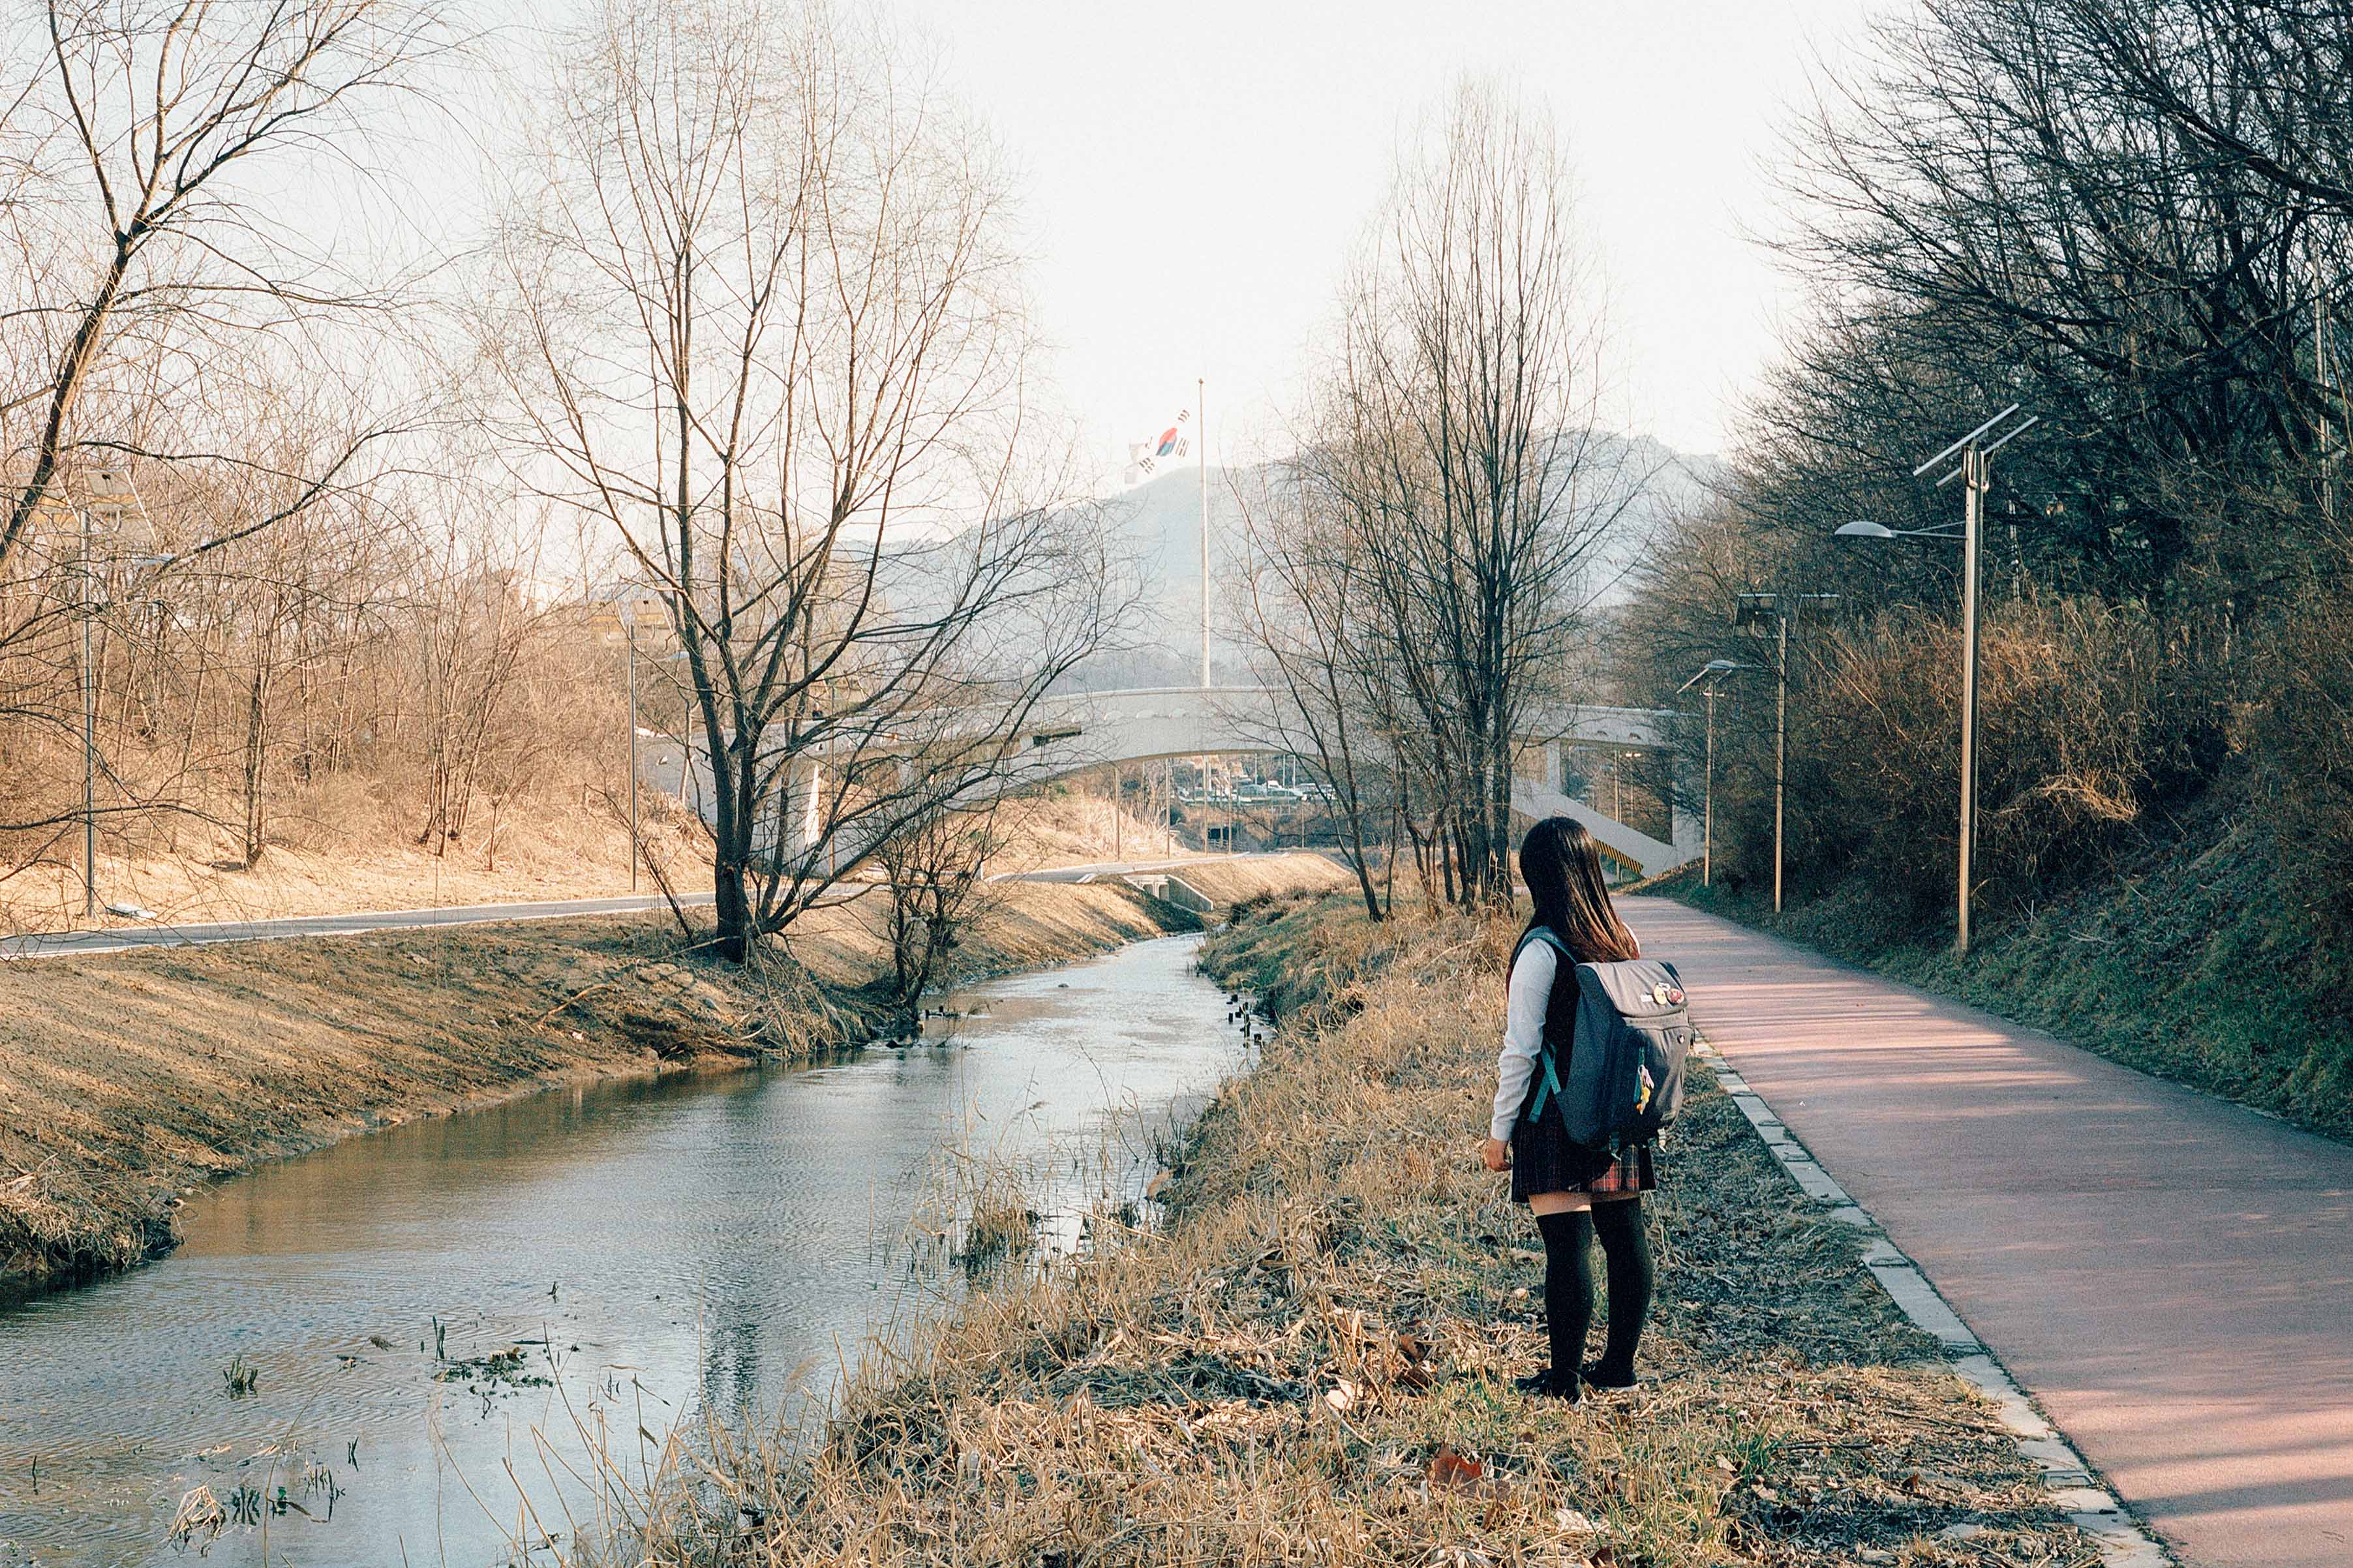 A schoolgirl stands next to a stream 